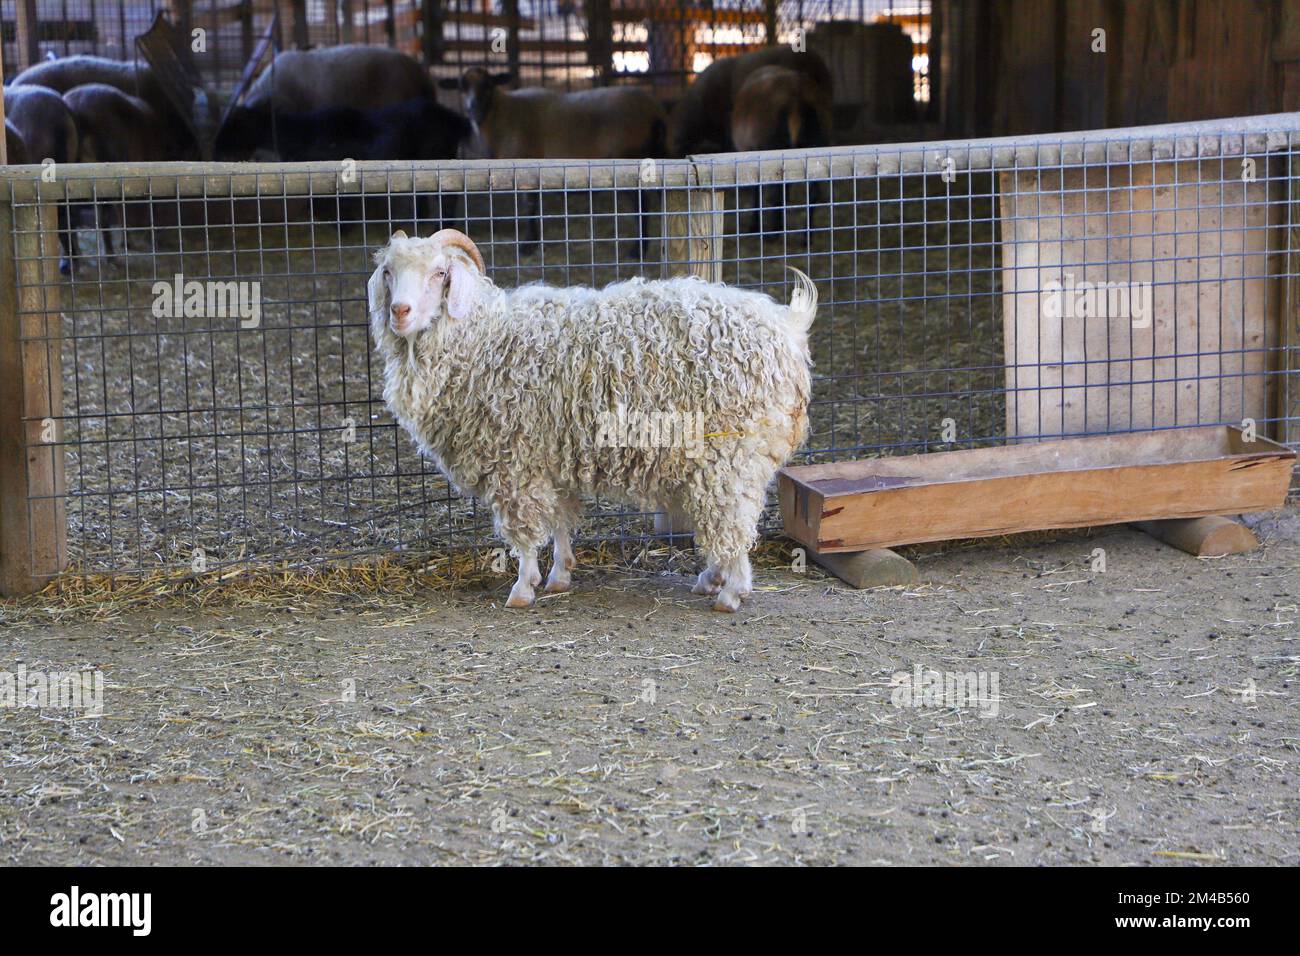 At the zoo, behind the fence, a sheep, white curly-haired, horned sheep Stock Photo